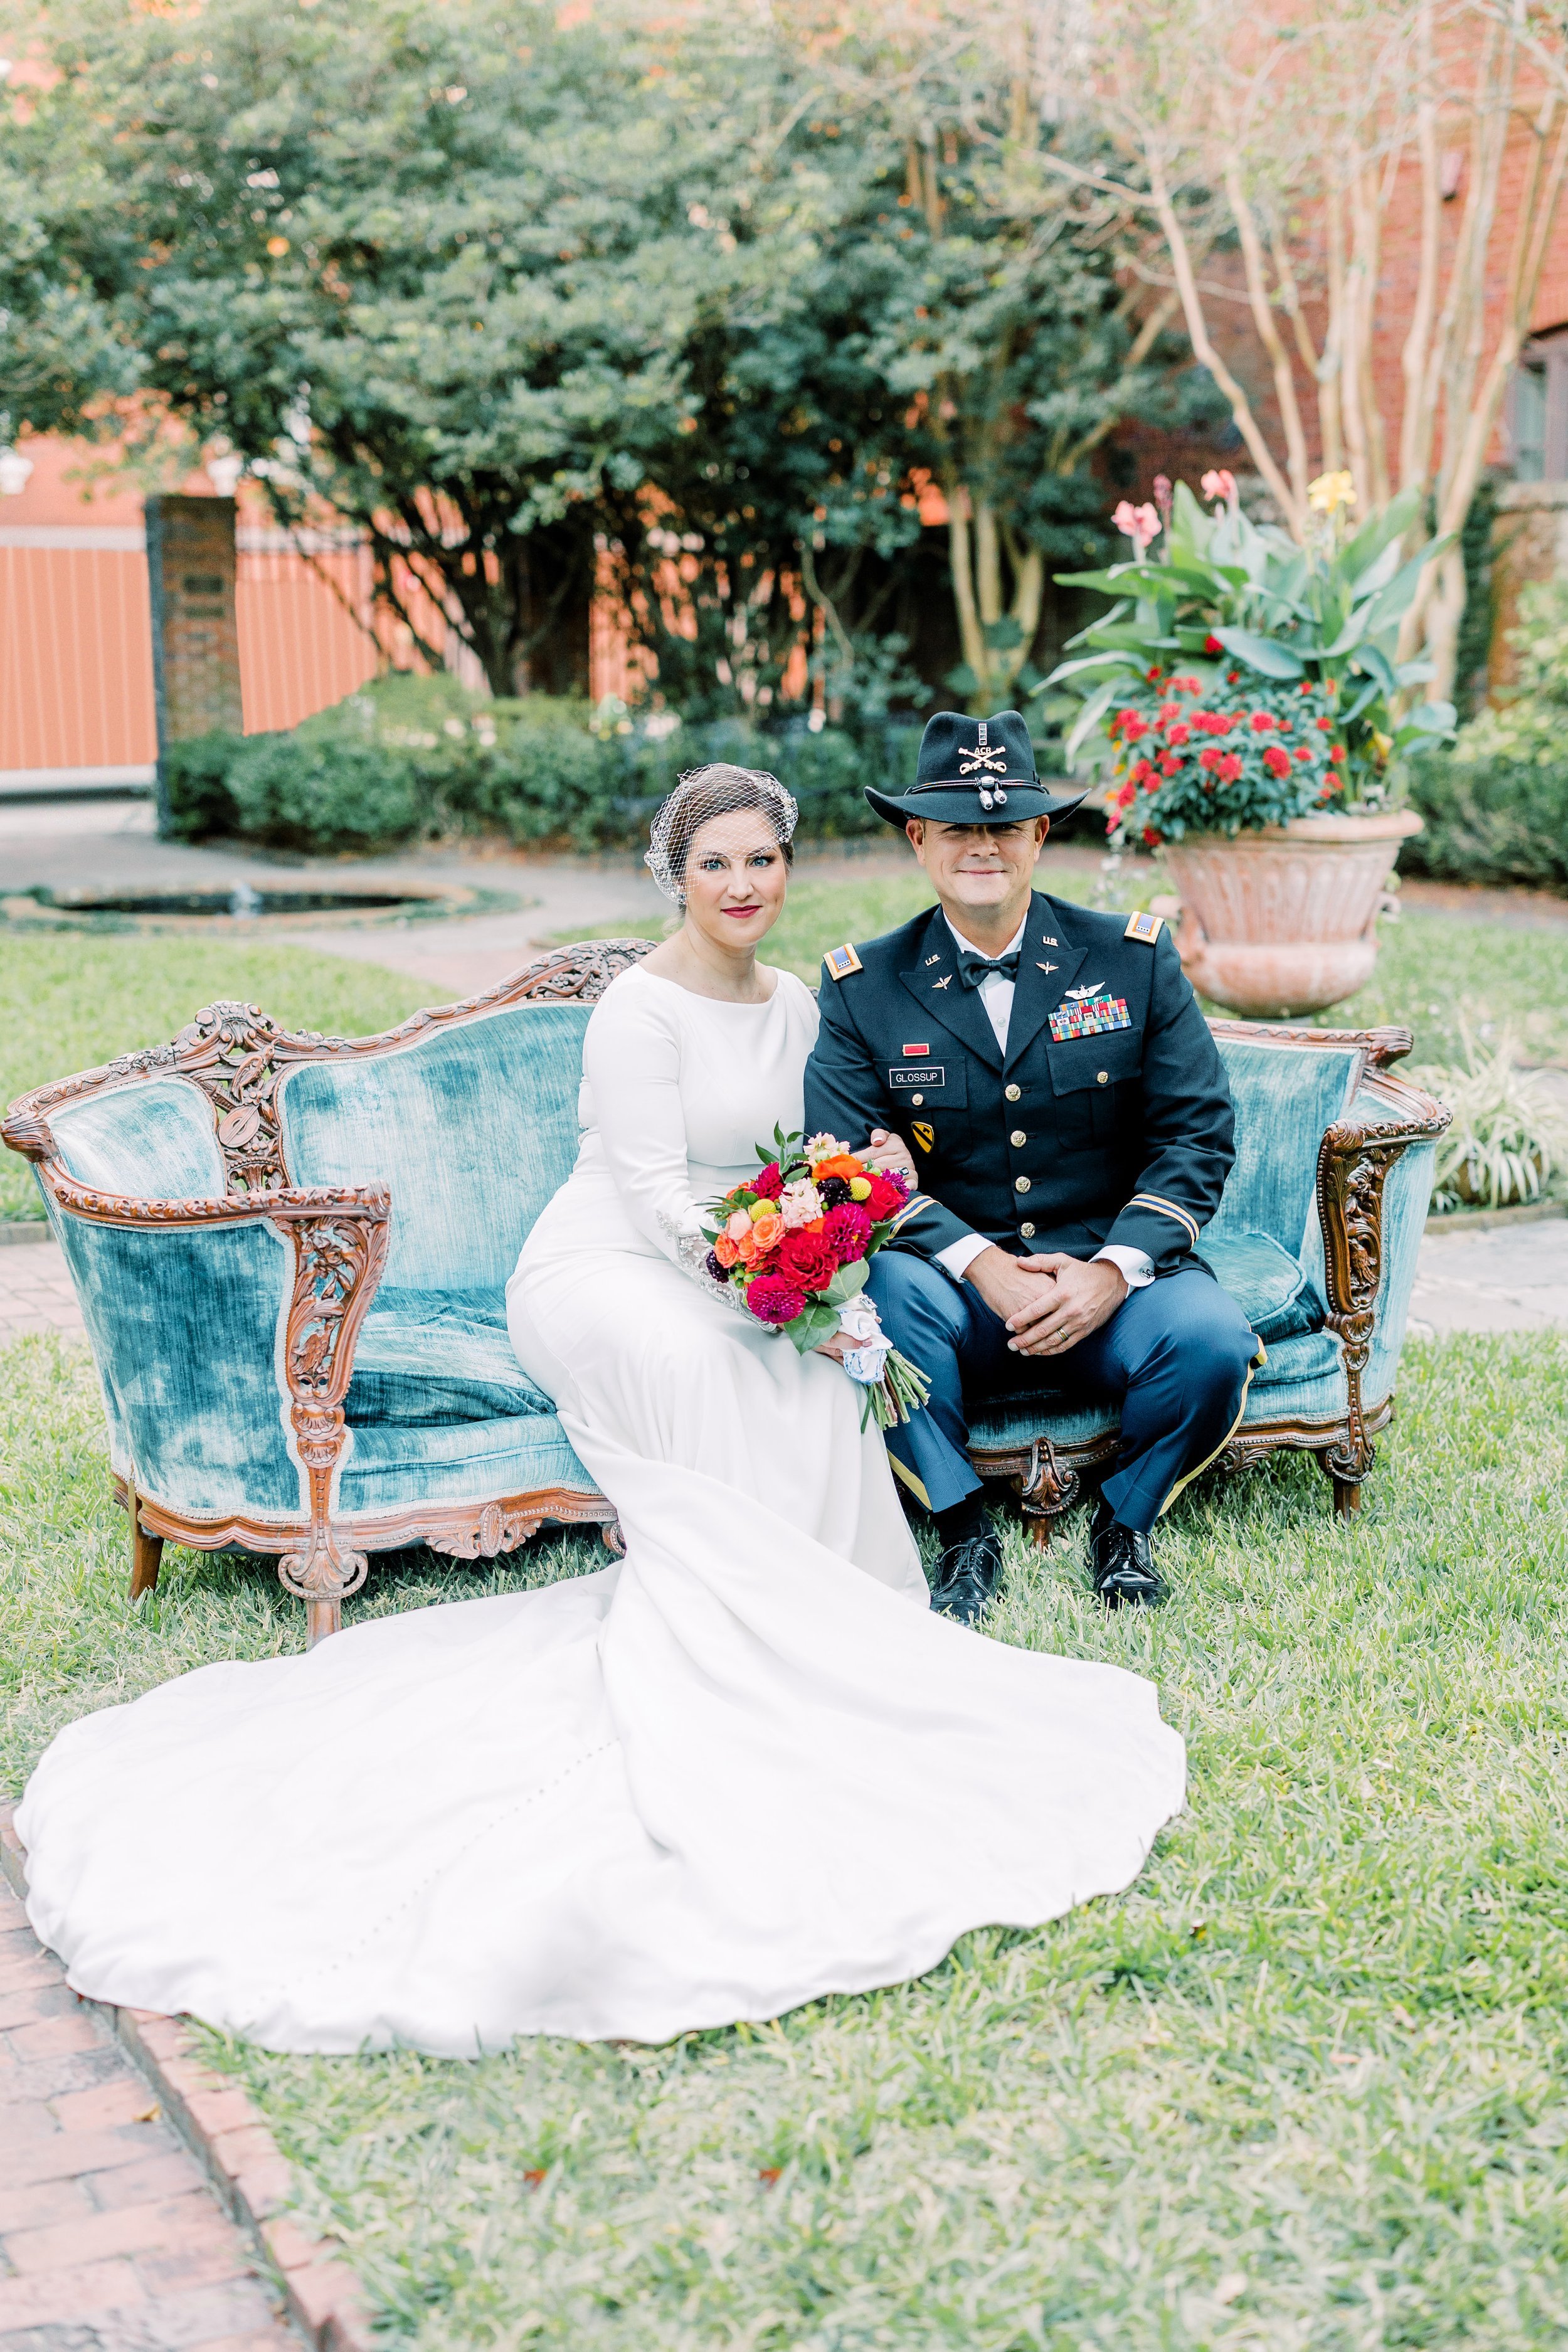 ivory-and-beau-blog-wedding-blog-real-bride-aston-by-sottero-and-midgley-maggie-sottero-wedding-dress-savannah-wedding-savannah-bride-savannah-bridal-shop-davenport-house-wedding-Rachel Linder Photography_Savannah Wedding Photographer-226.jpg